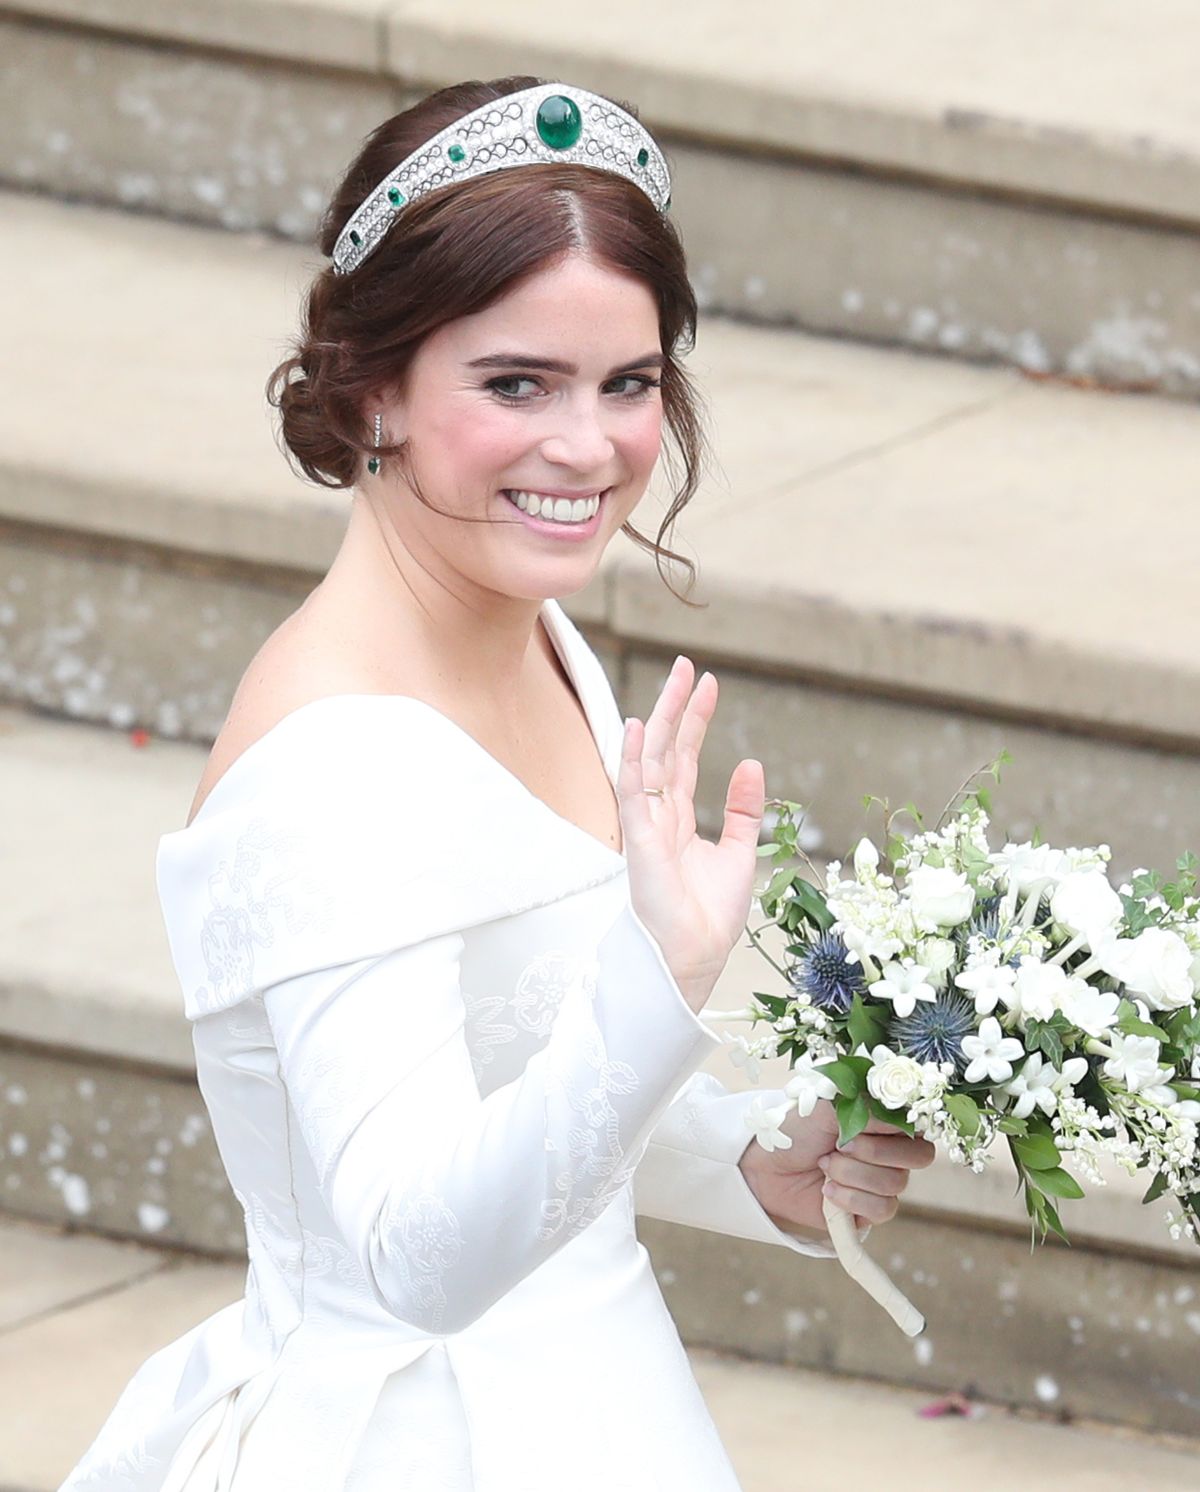 Princess Eugenie's Low-Back Wedding Dress Proudly Shows Off Her Scoliosis Scar